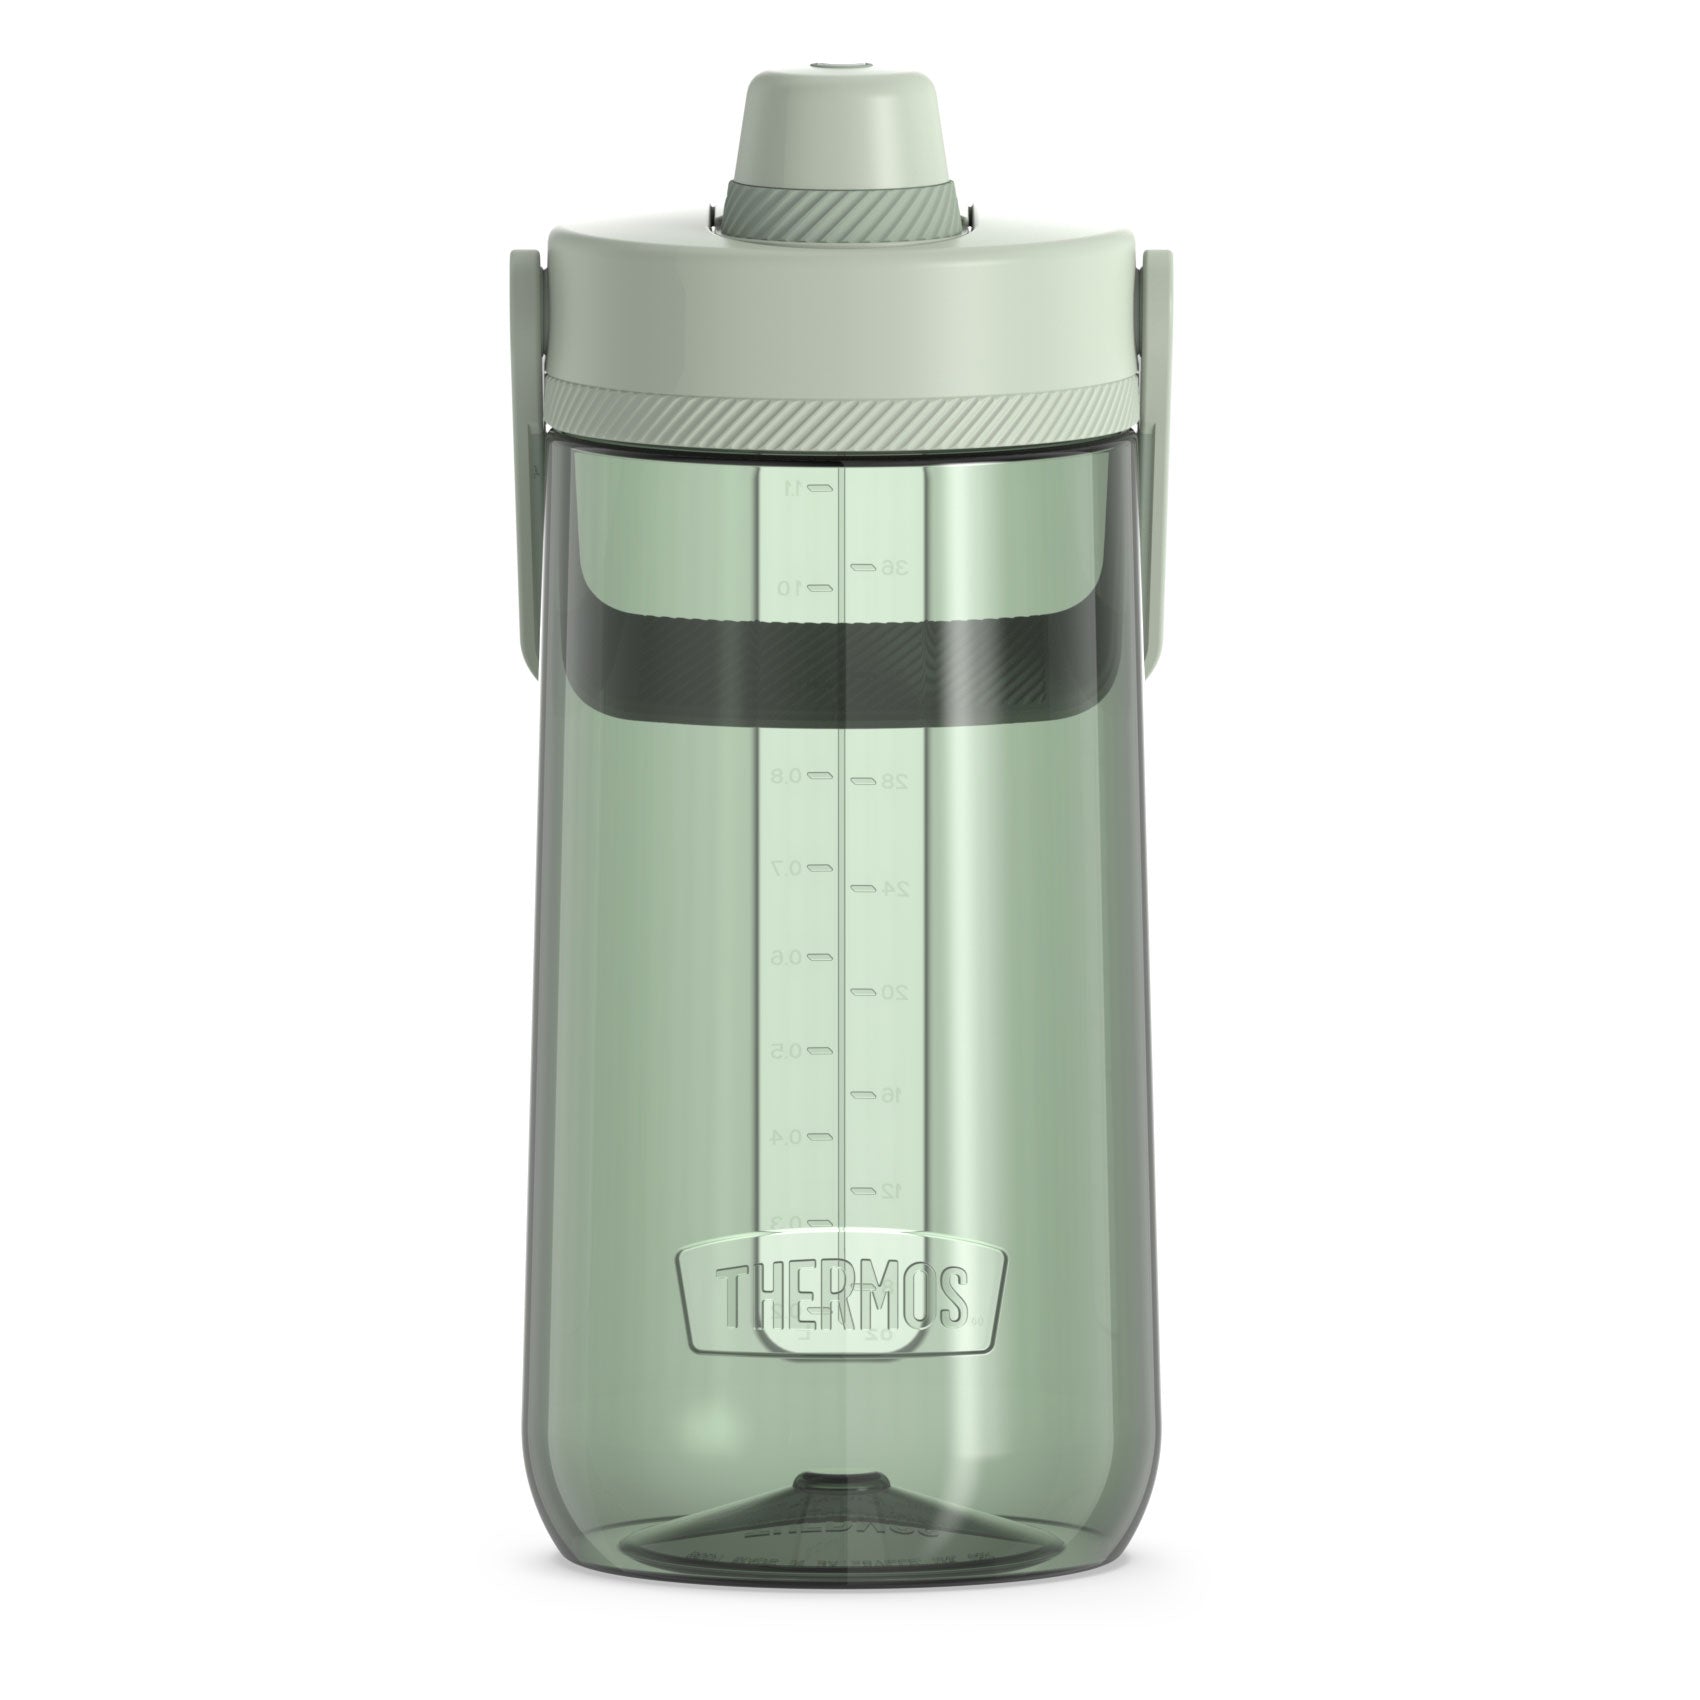 THERMOS HS4080CHTRI4 24-oz Stainless Steel Hydration Bottle - THRHS4080CH 